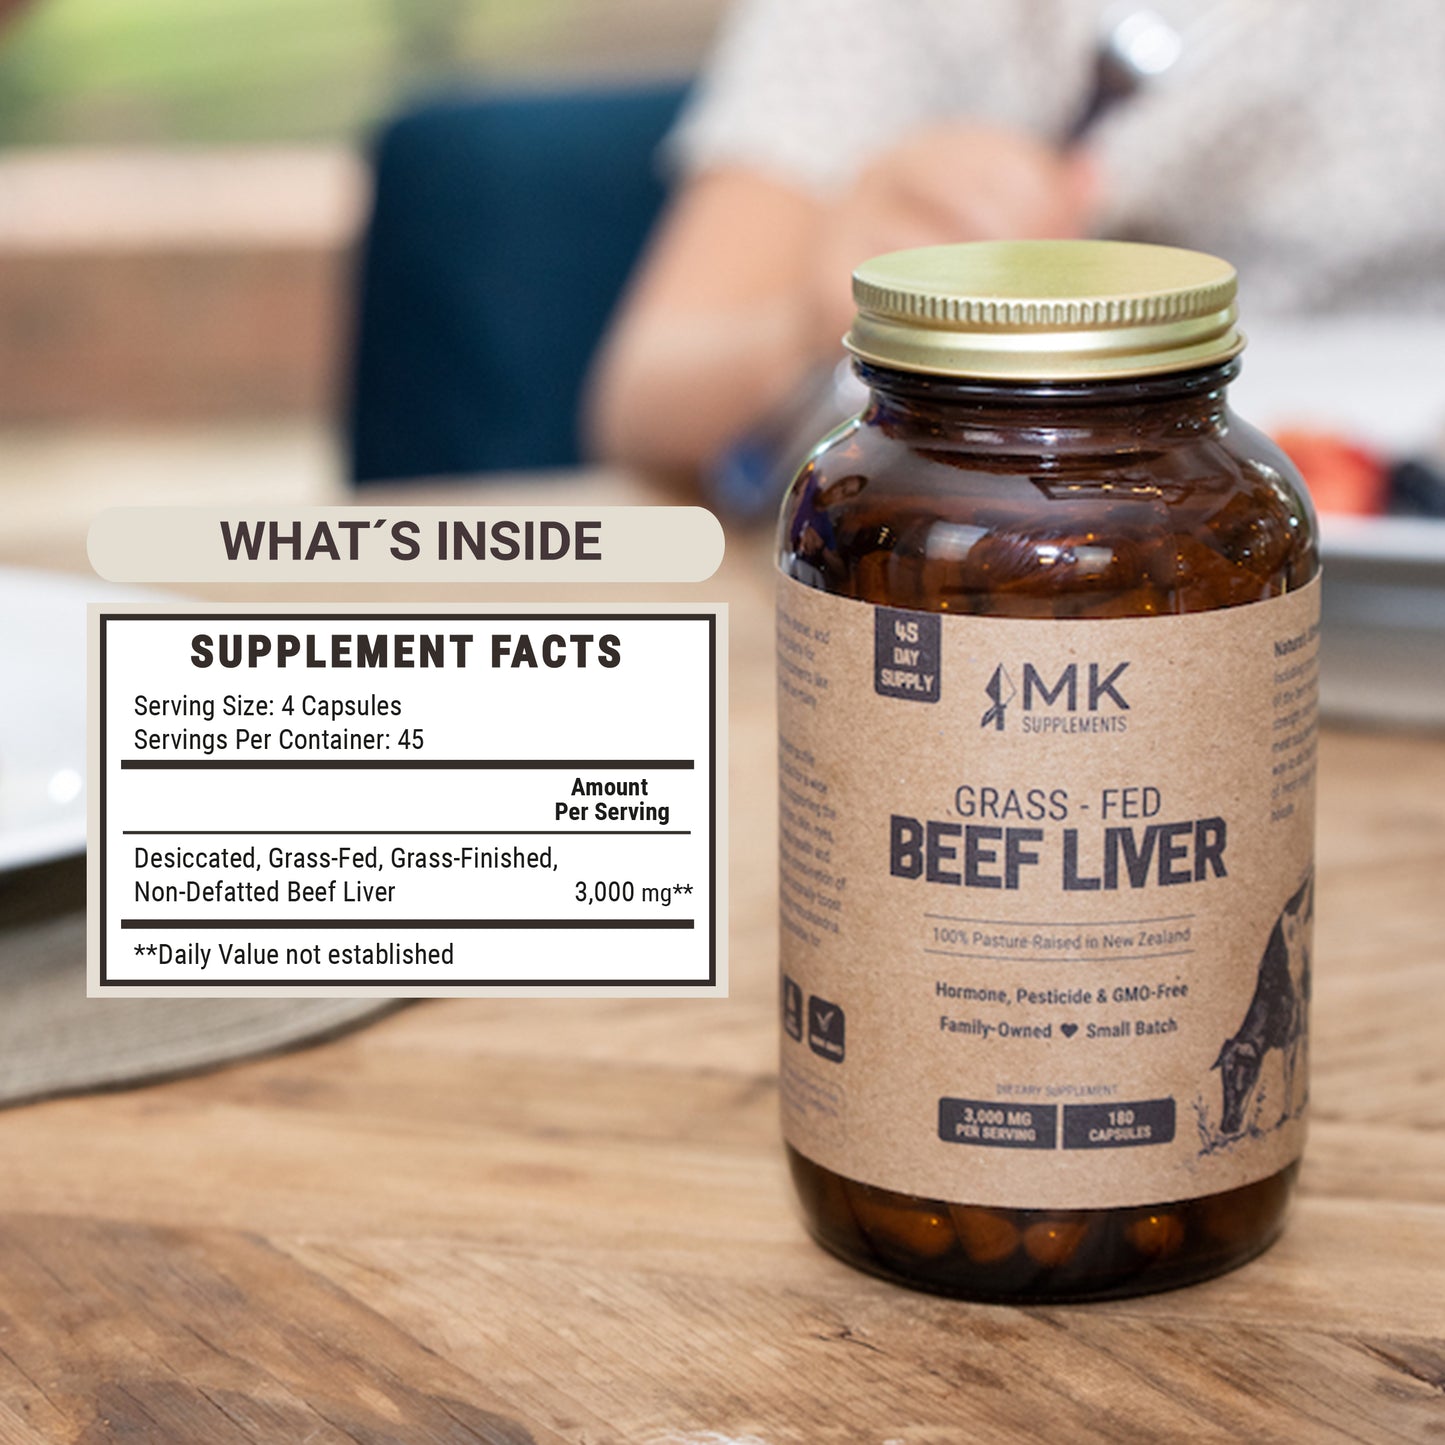 MK Supplements - Beef Liver - Supplements Facts Panel